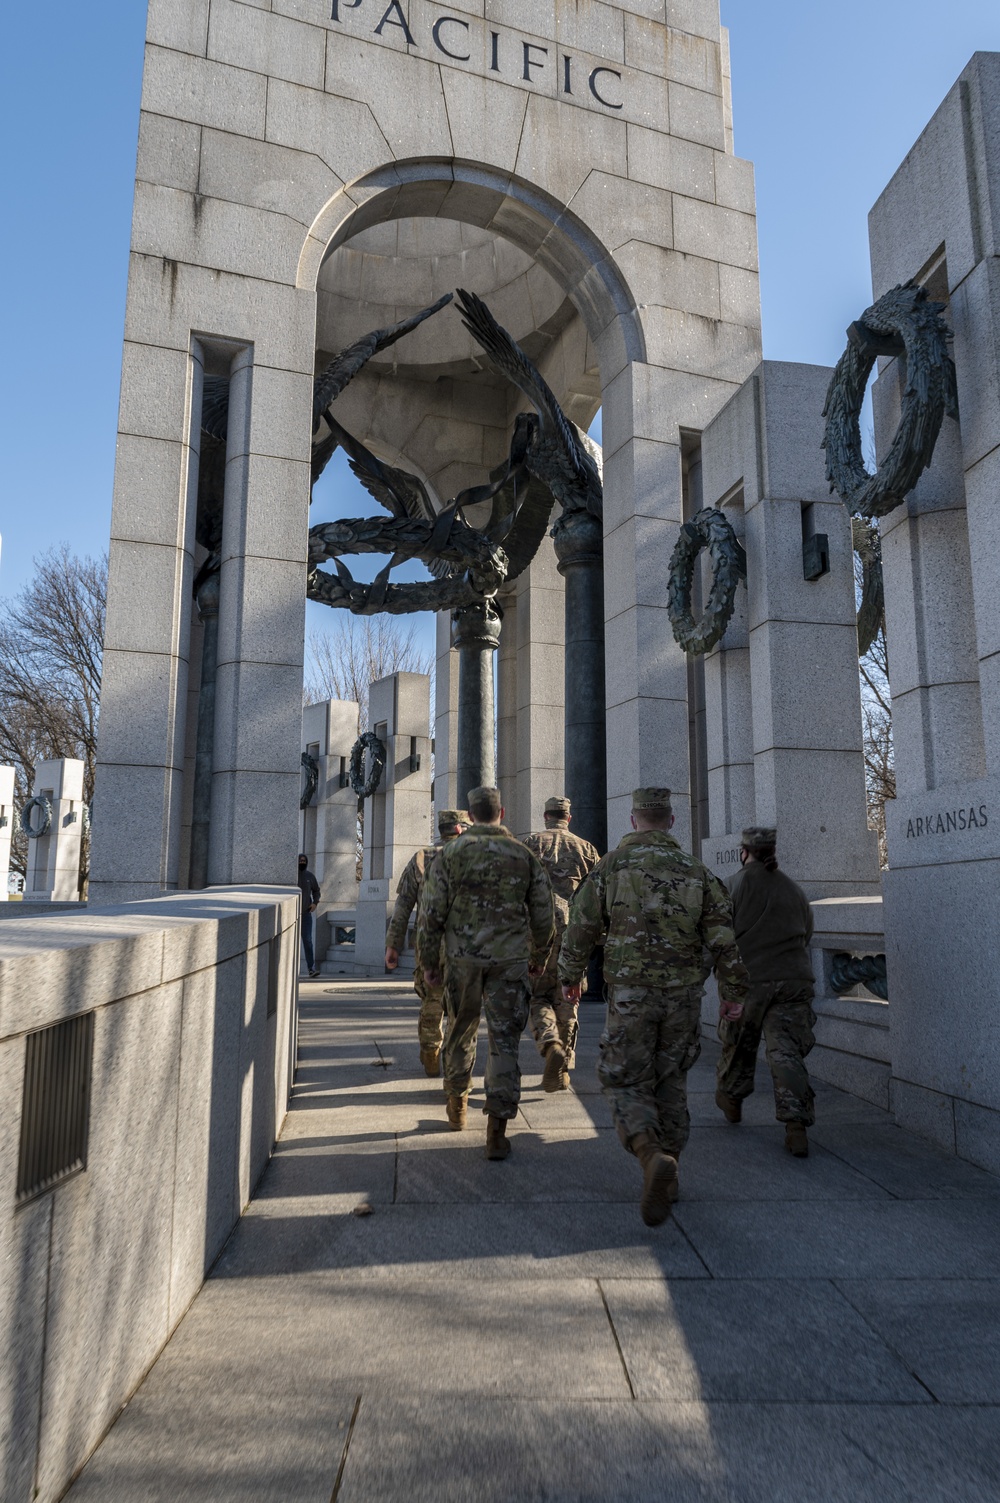 North Dakota National Guard 816th Military Police Company providing support in D.C. to federal and district authorities